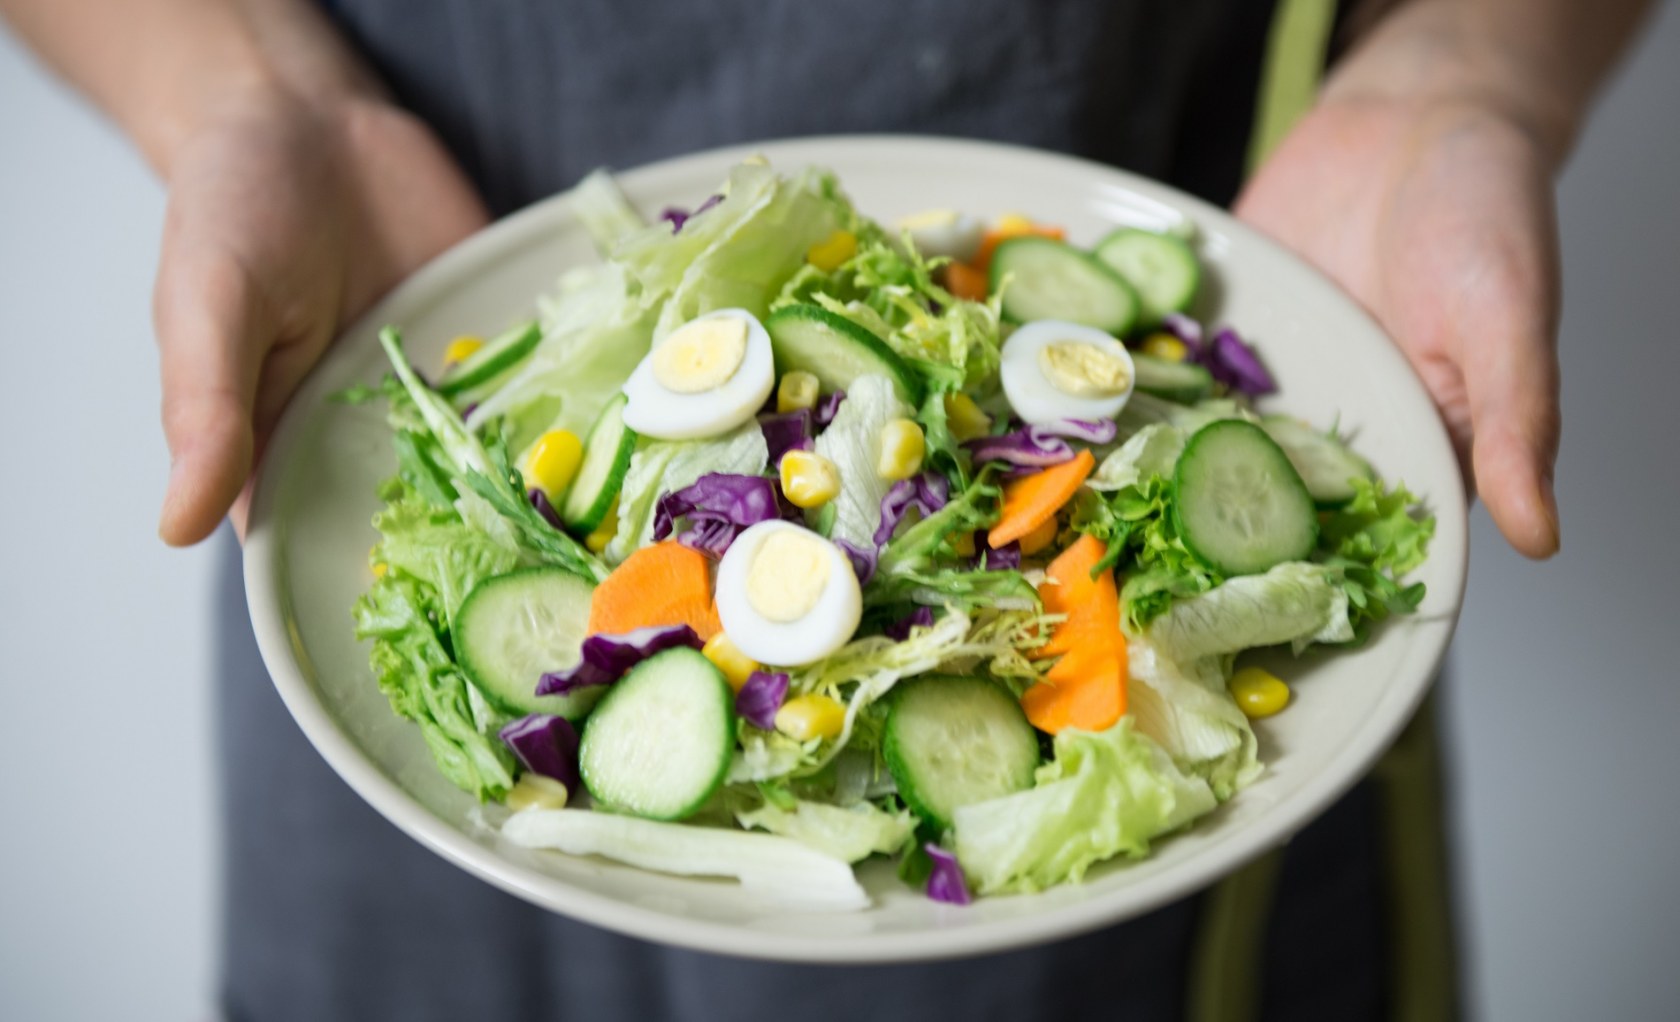 Google removes eggs from salad emoji to make it more inclusive for vegans